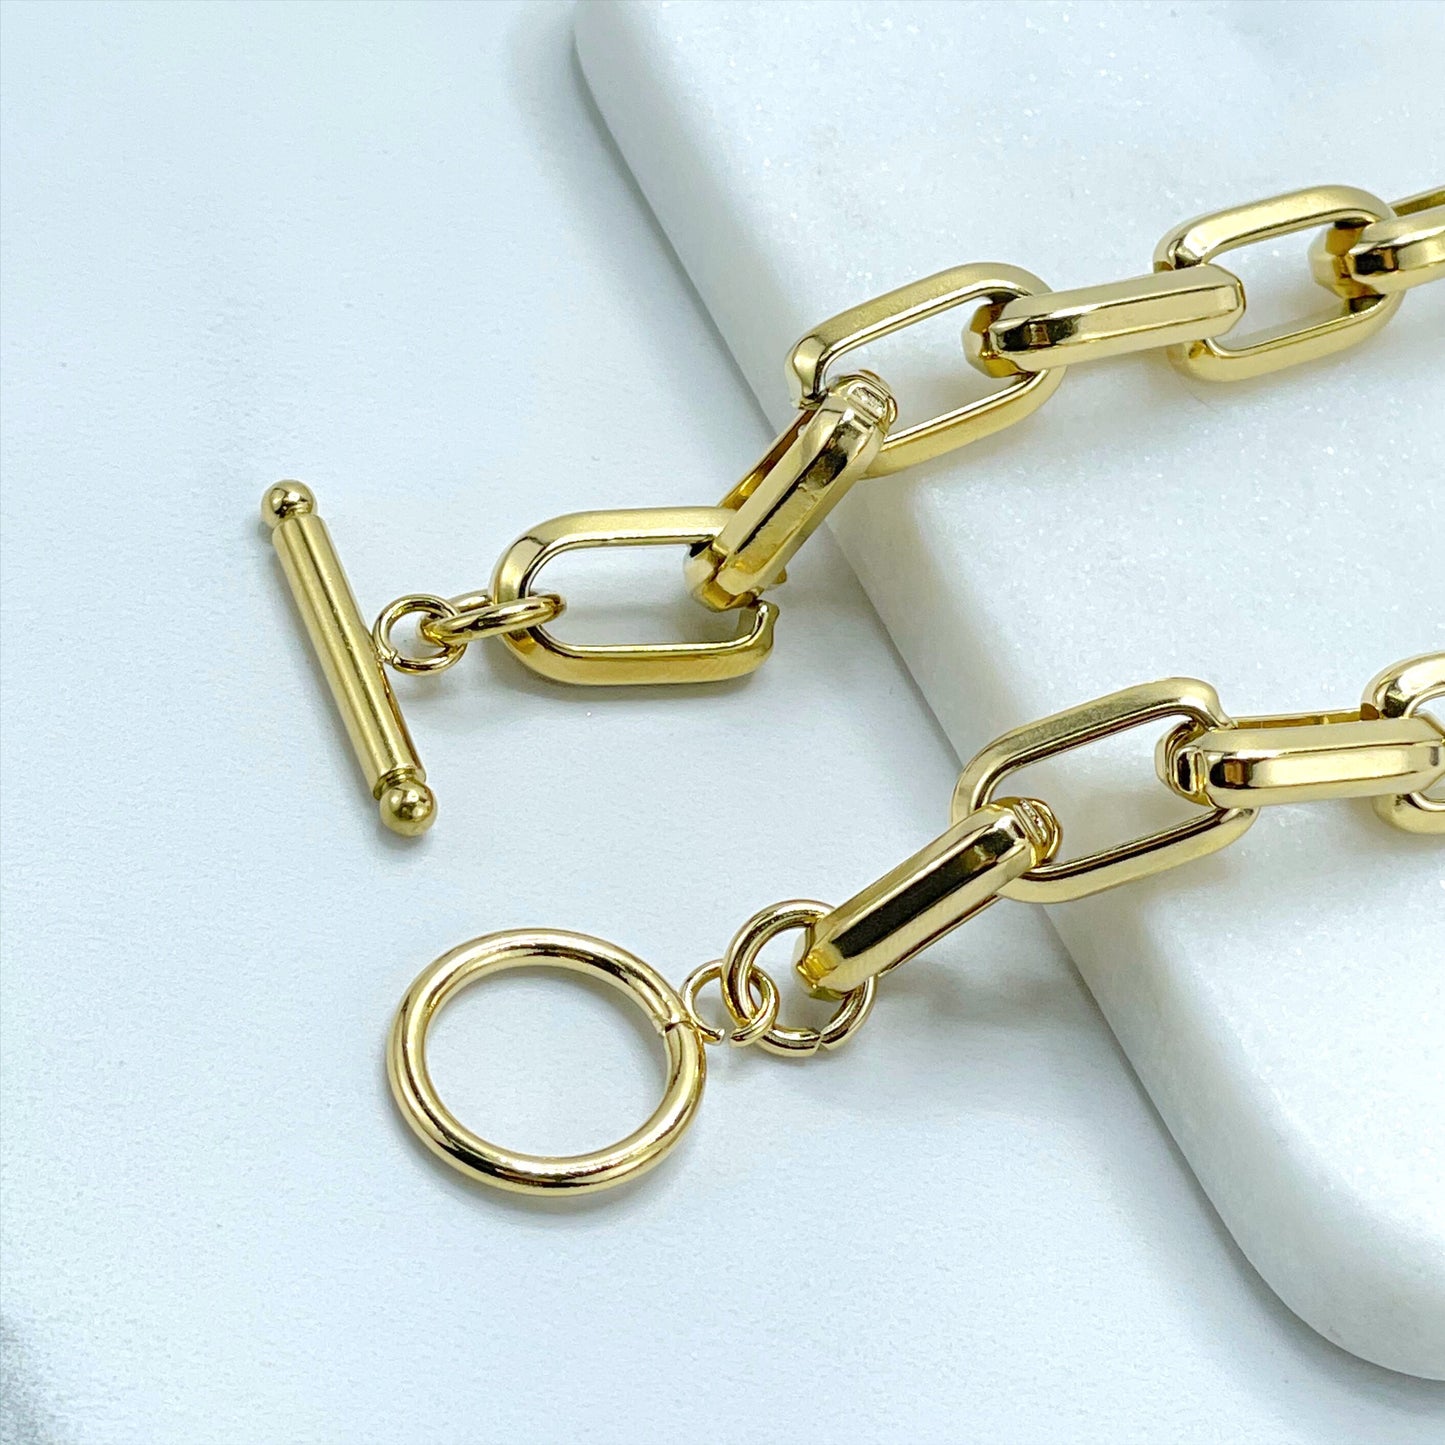 Gold Plated in Stainless Spring Clasp 10mm Curb Link Bracelet, 8 or 9 Inches, Wholesale Jewelry Making Supplies